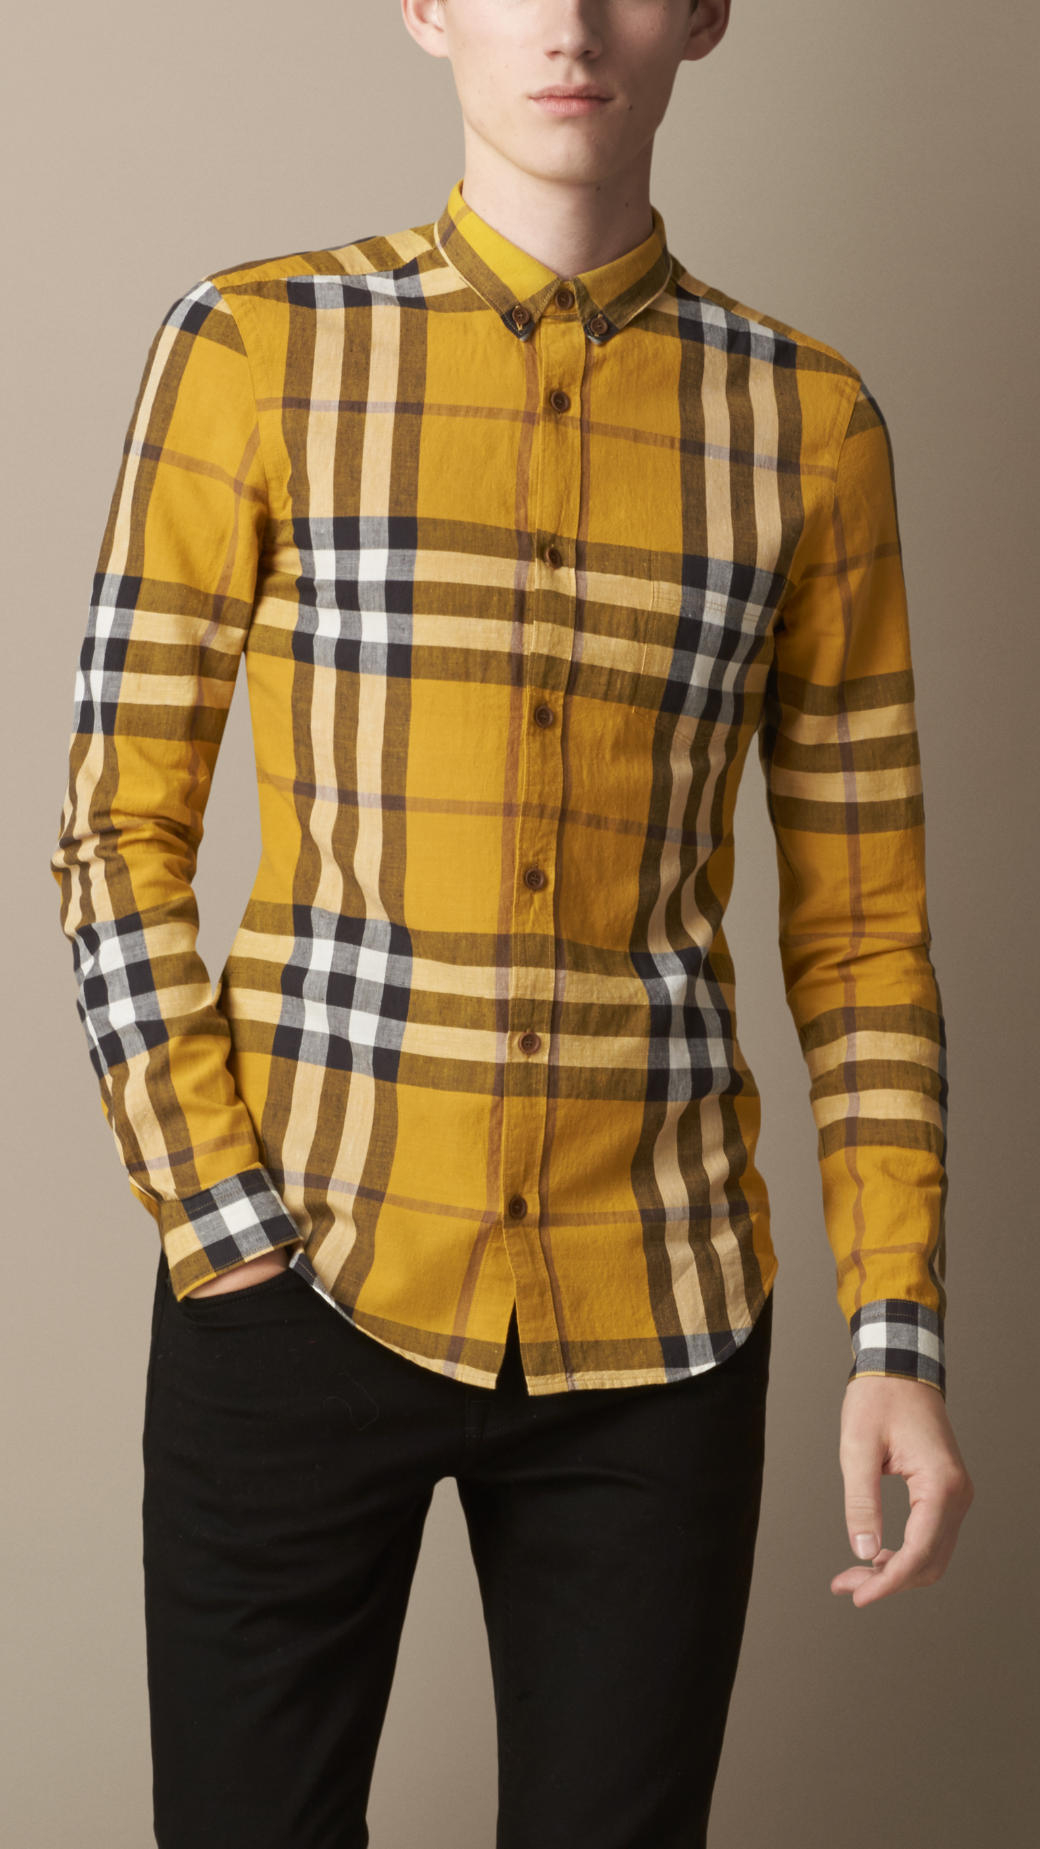 Lyst - Burberry Exploded Check Cotton Linen Shirt in Yellow for Men